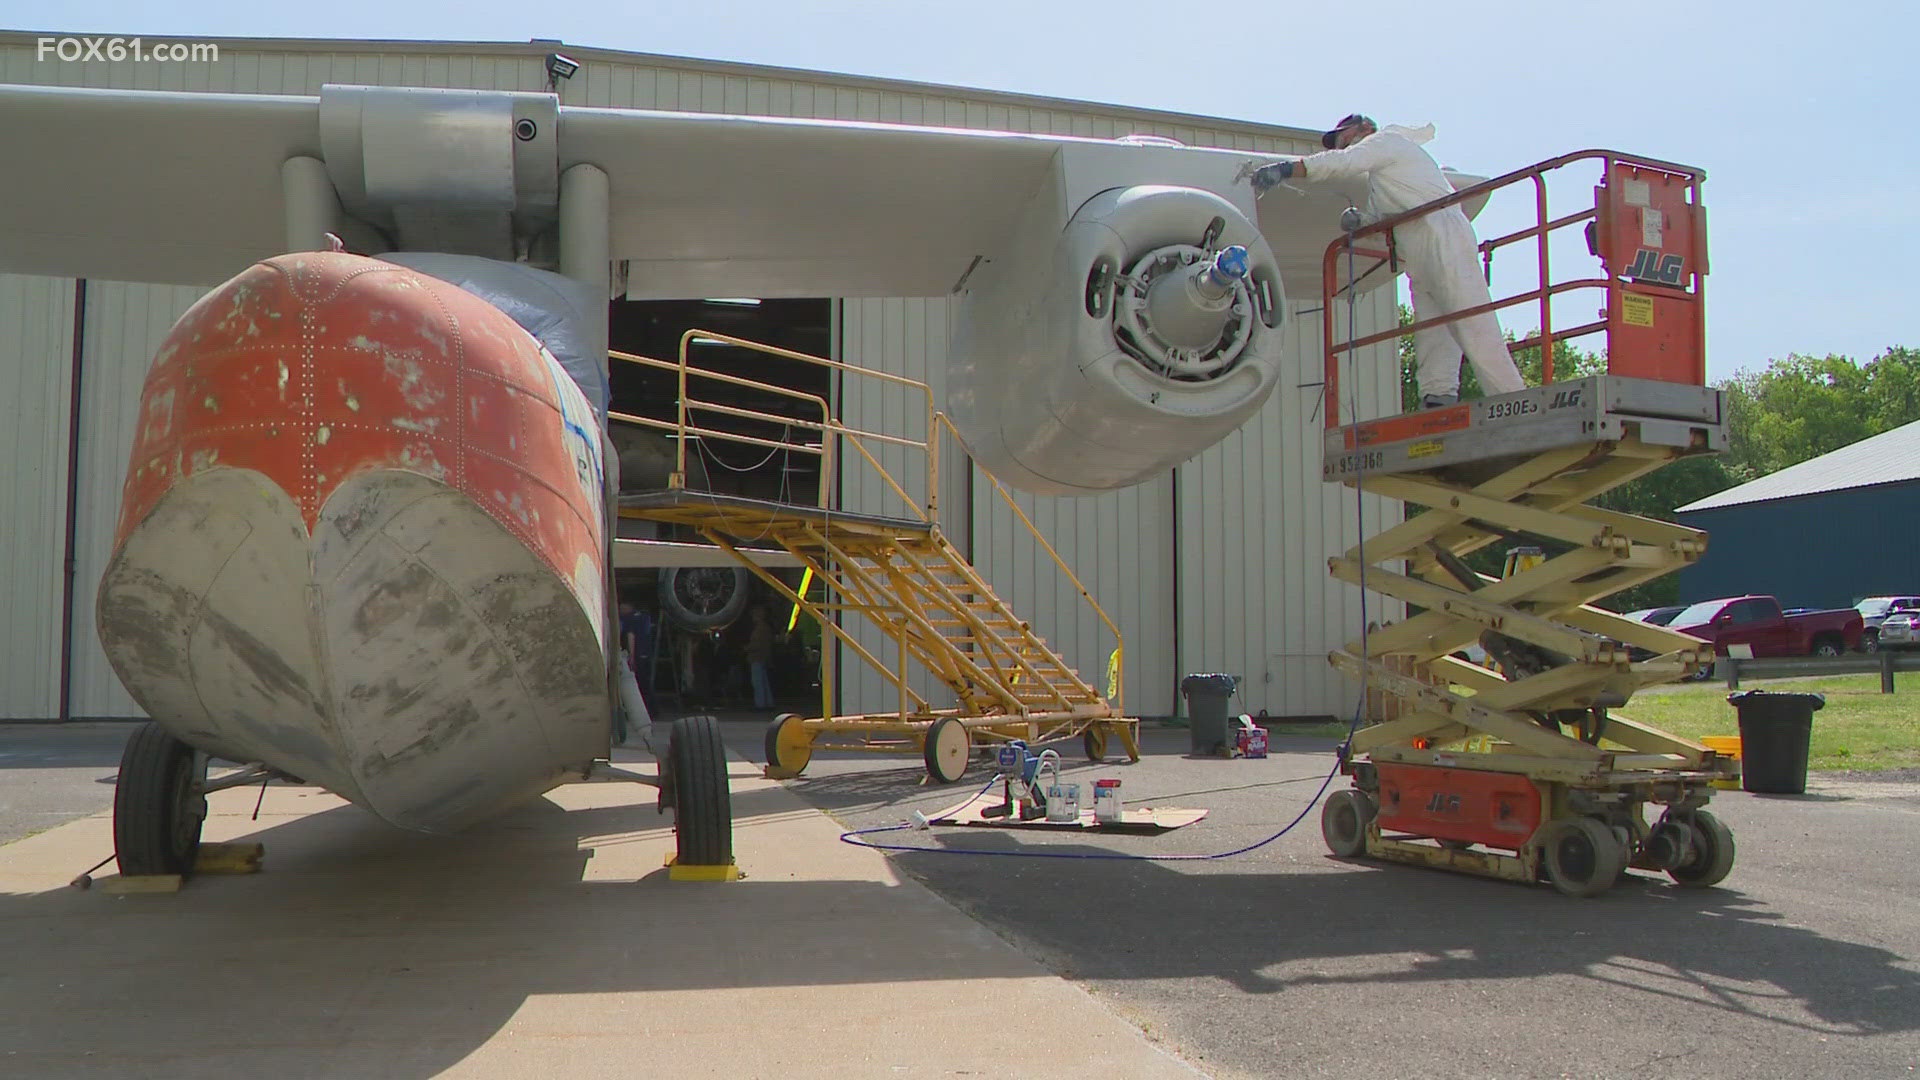 A preservation project is underway at the New England Air Museum in Windsor Locks. New life is being given to a Connecticut-made aircraft from the past.